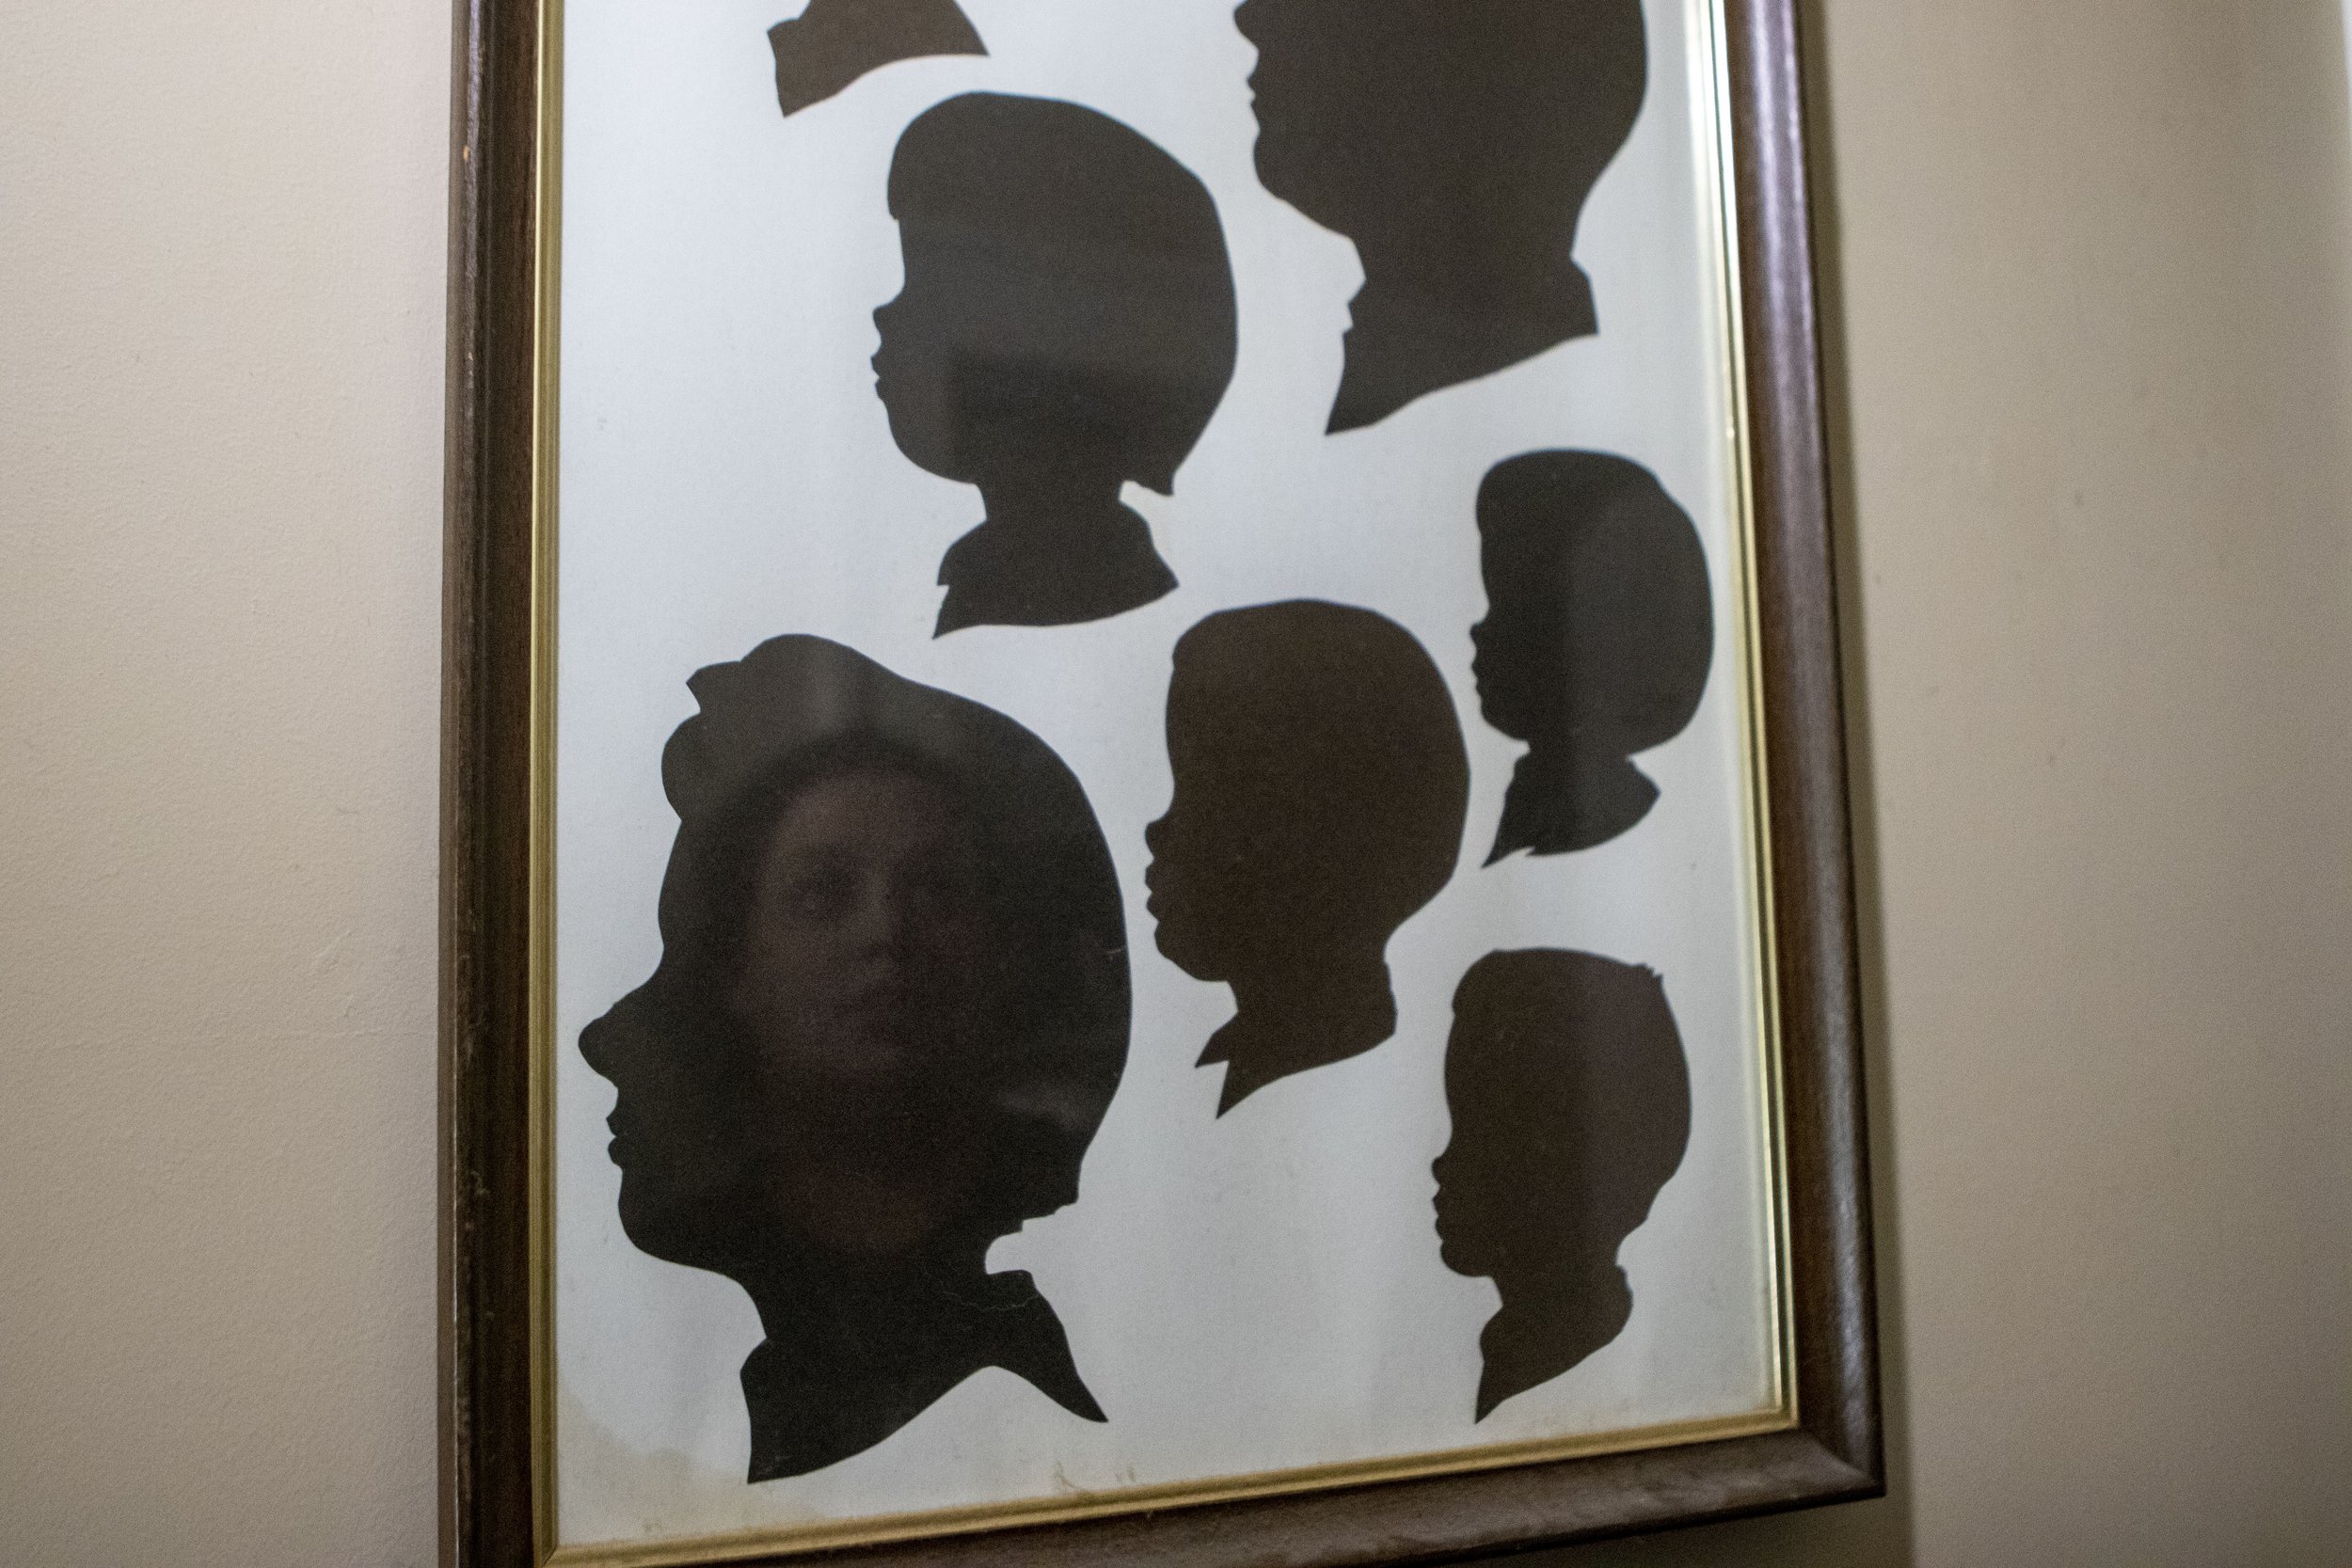  Breanna looks up a shadow portrait of her mother and other family members. The house is full of reminders and photos of Kay’s legacy. 